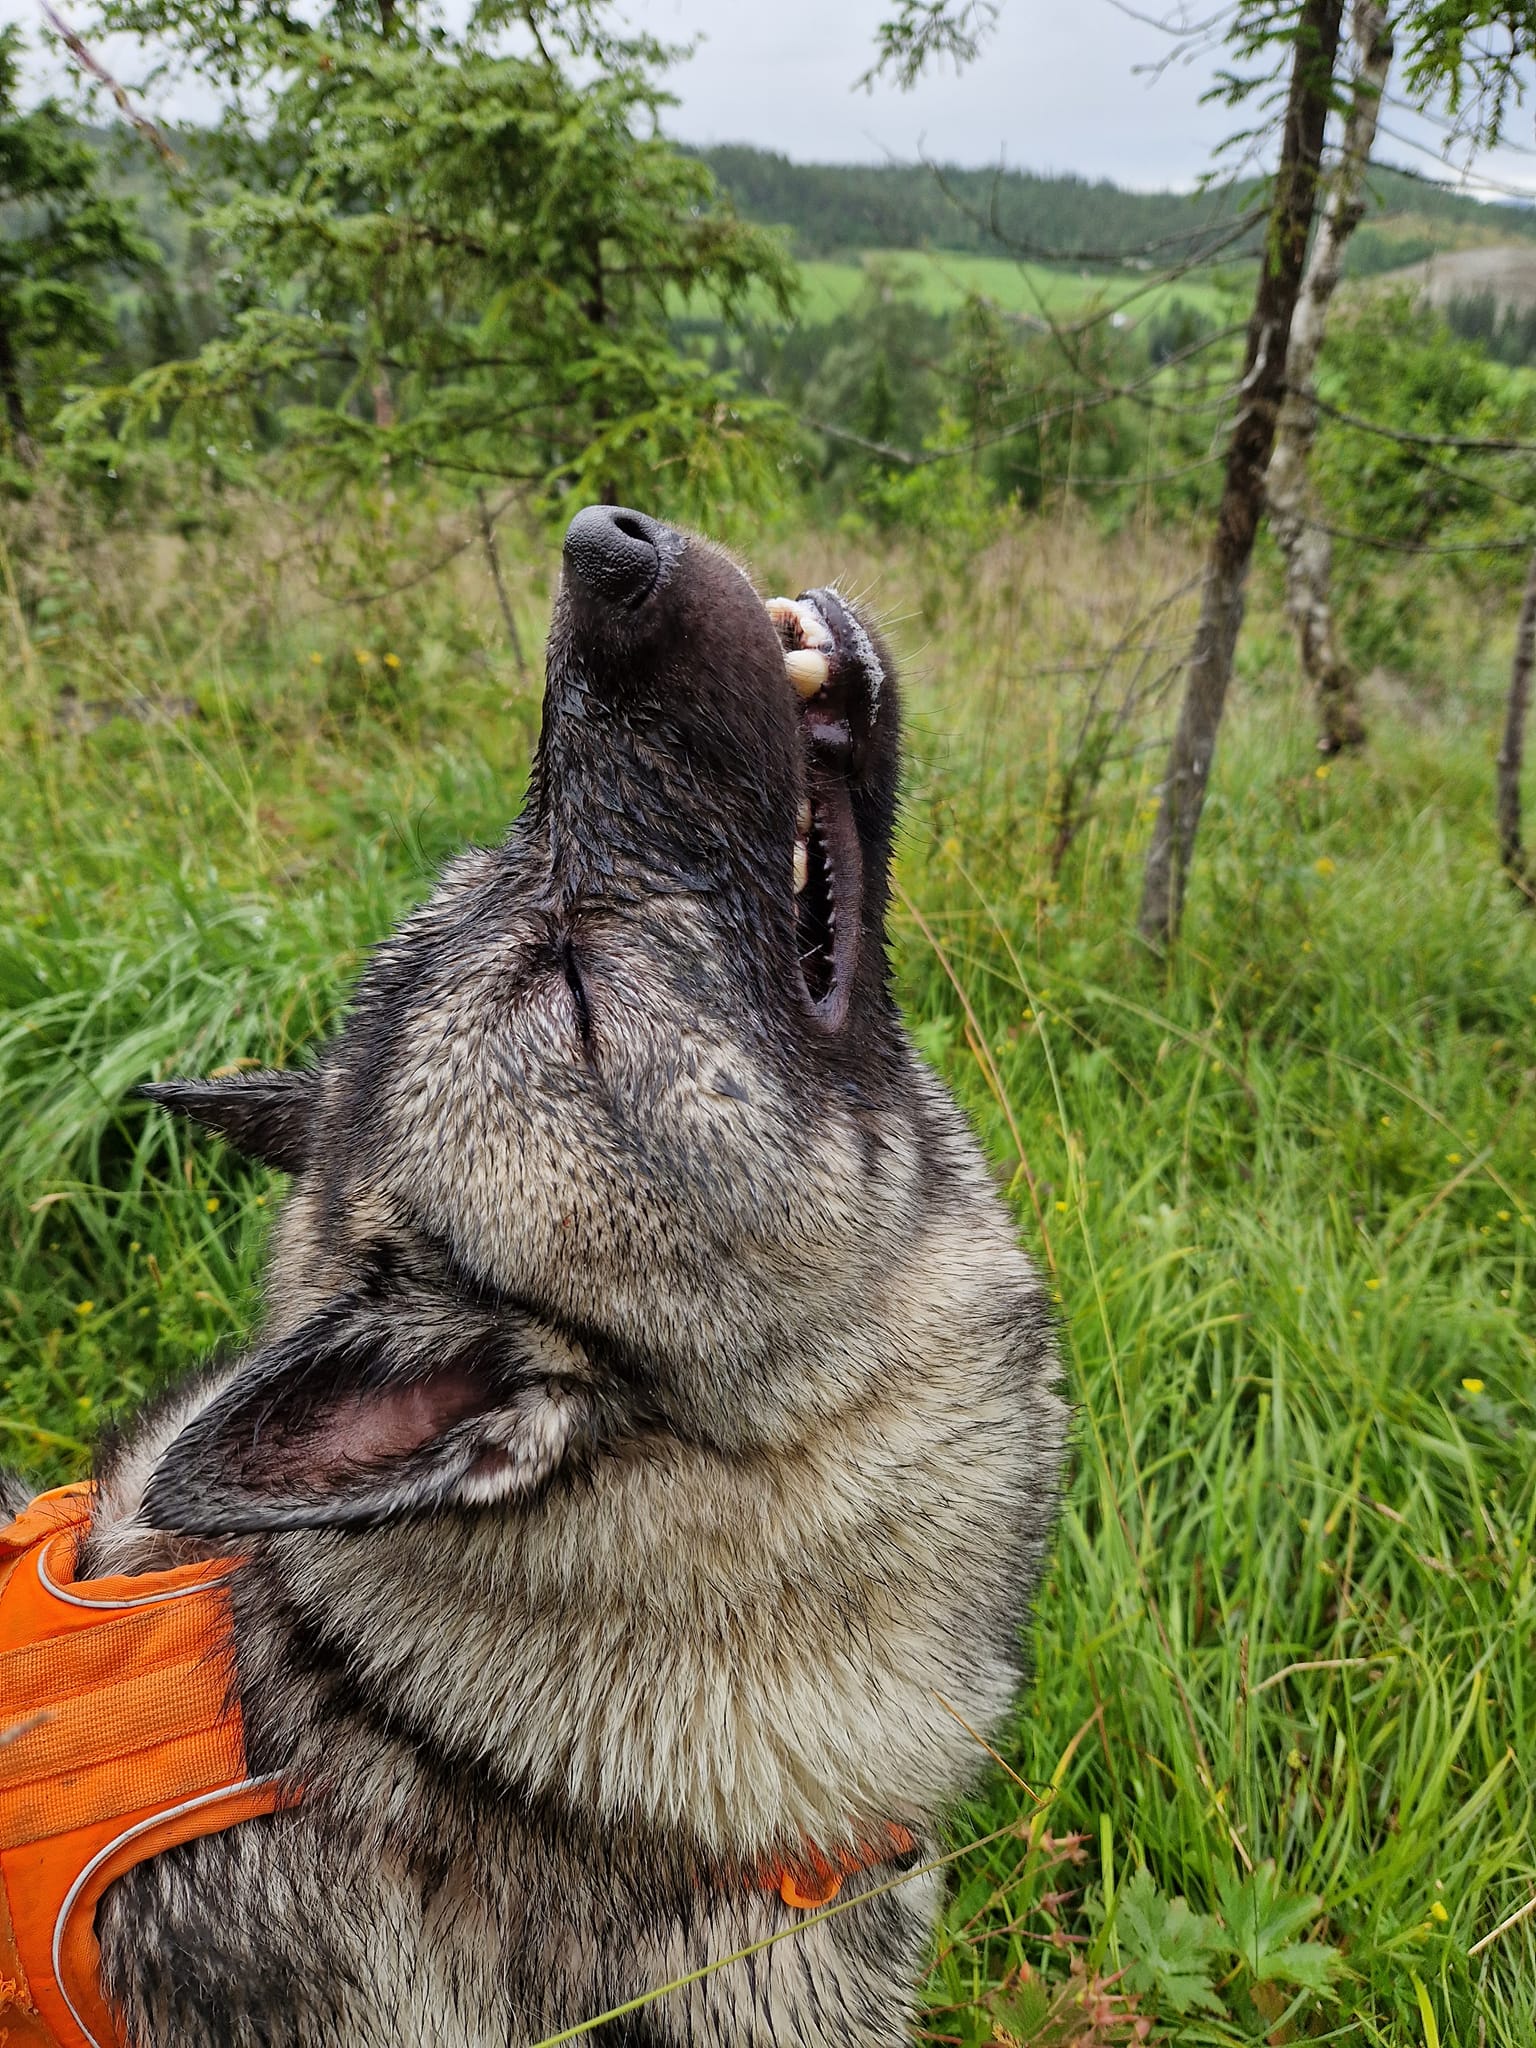 Elkhound sniffing the air on a hunt.